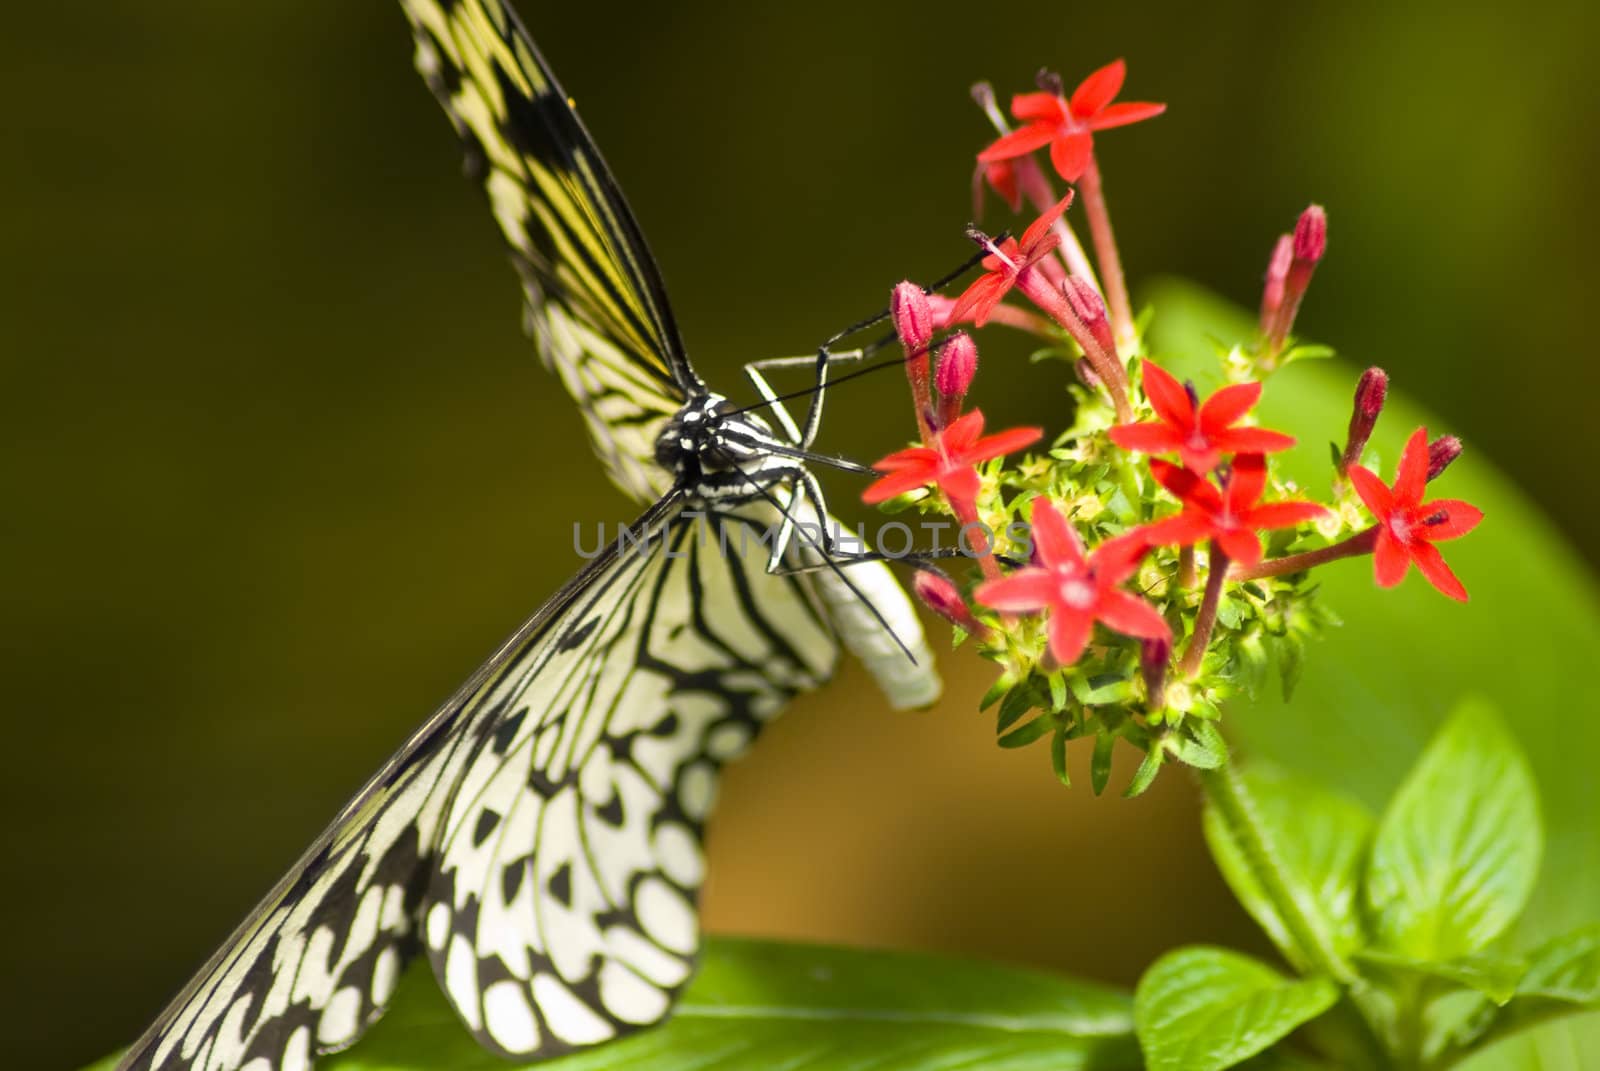 Close up of a black and white butterfly on a plant with a green bakcground